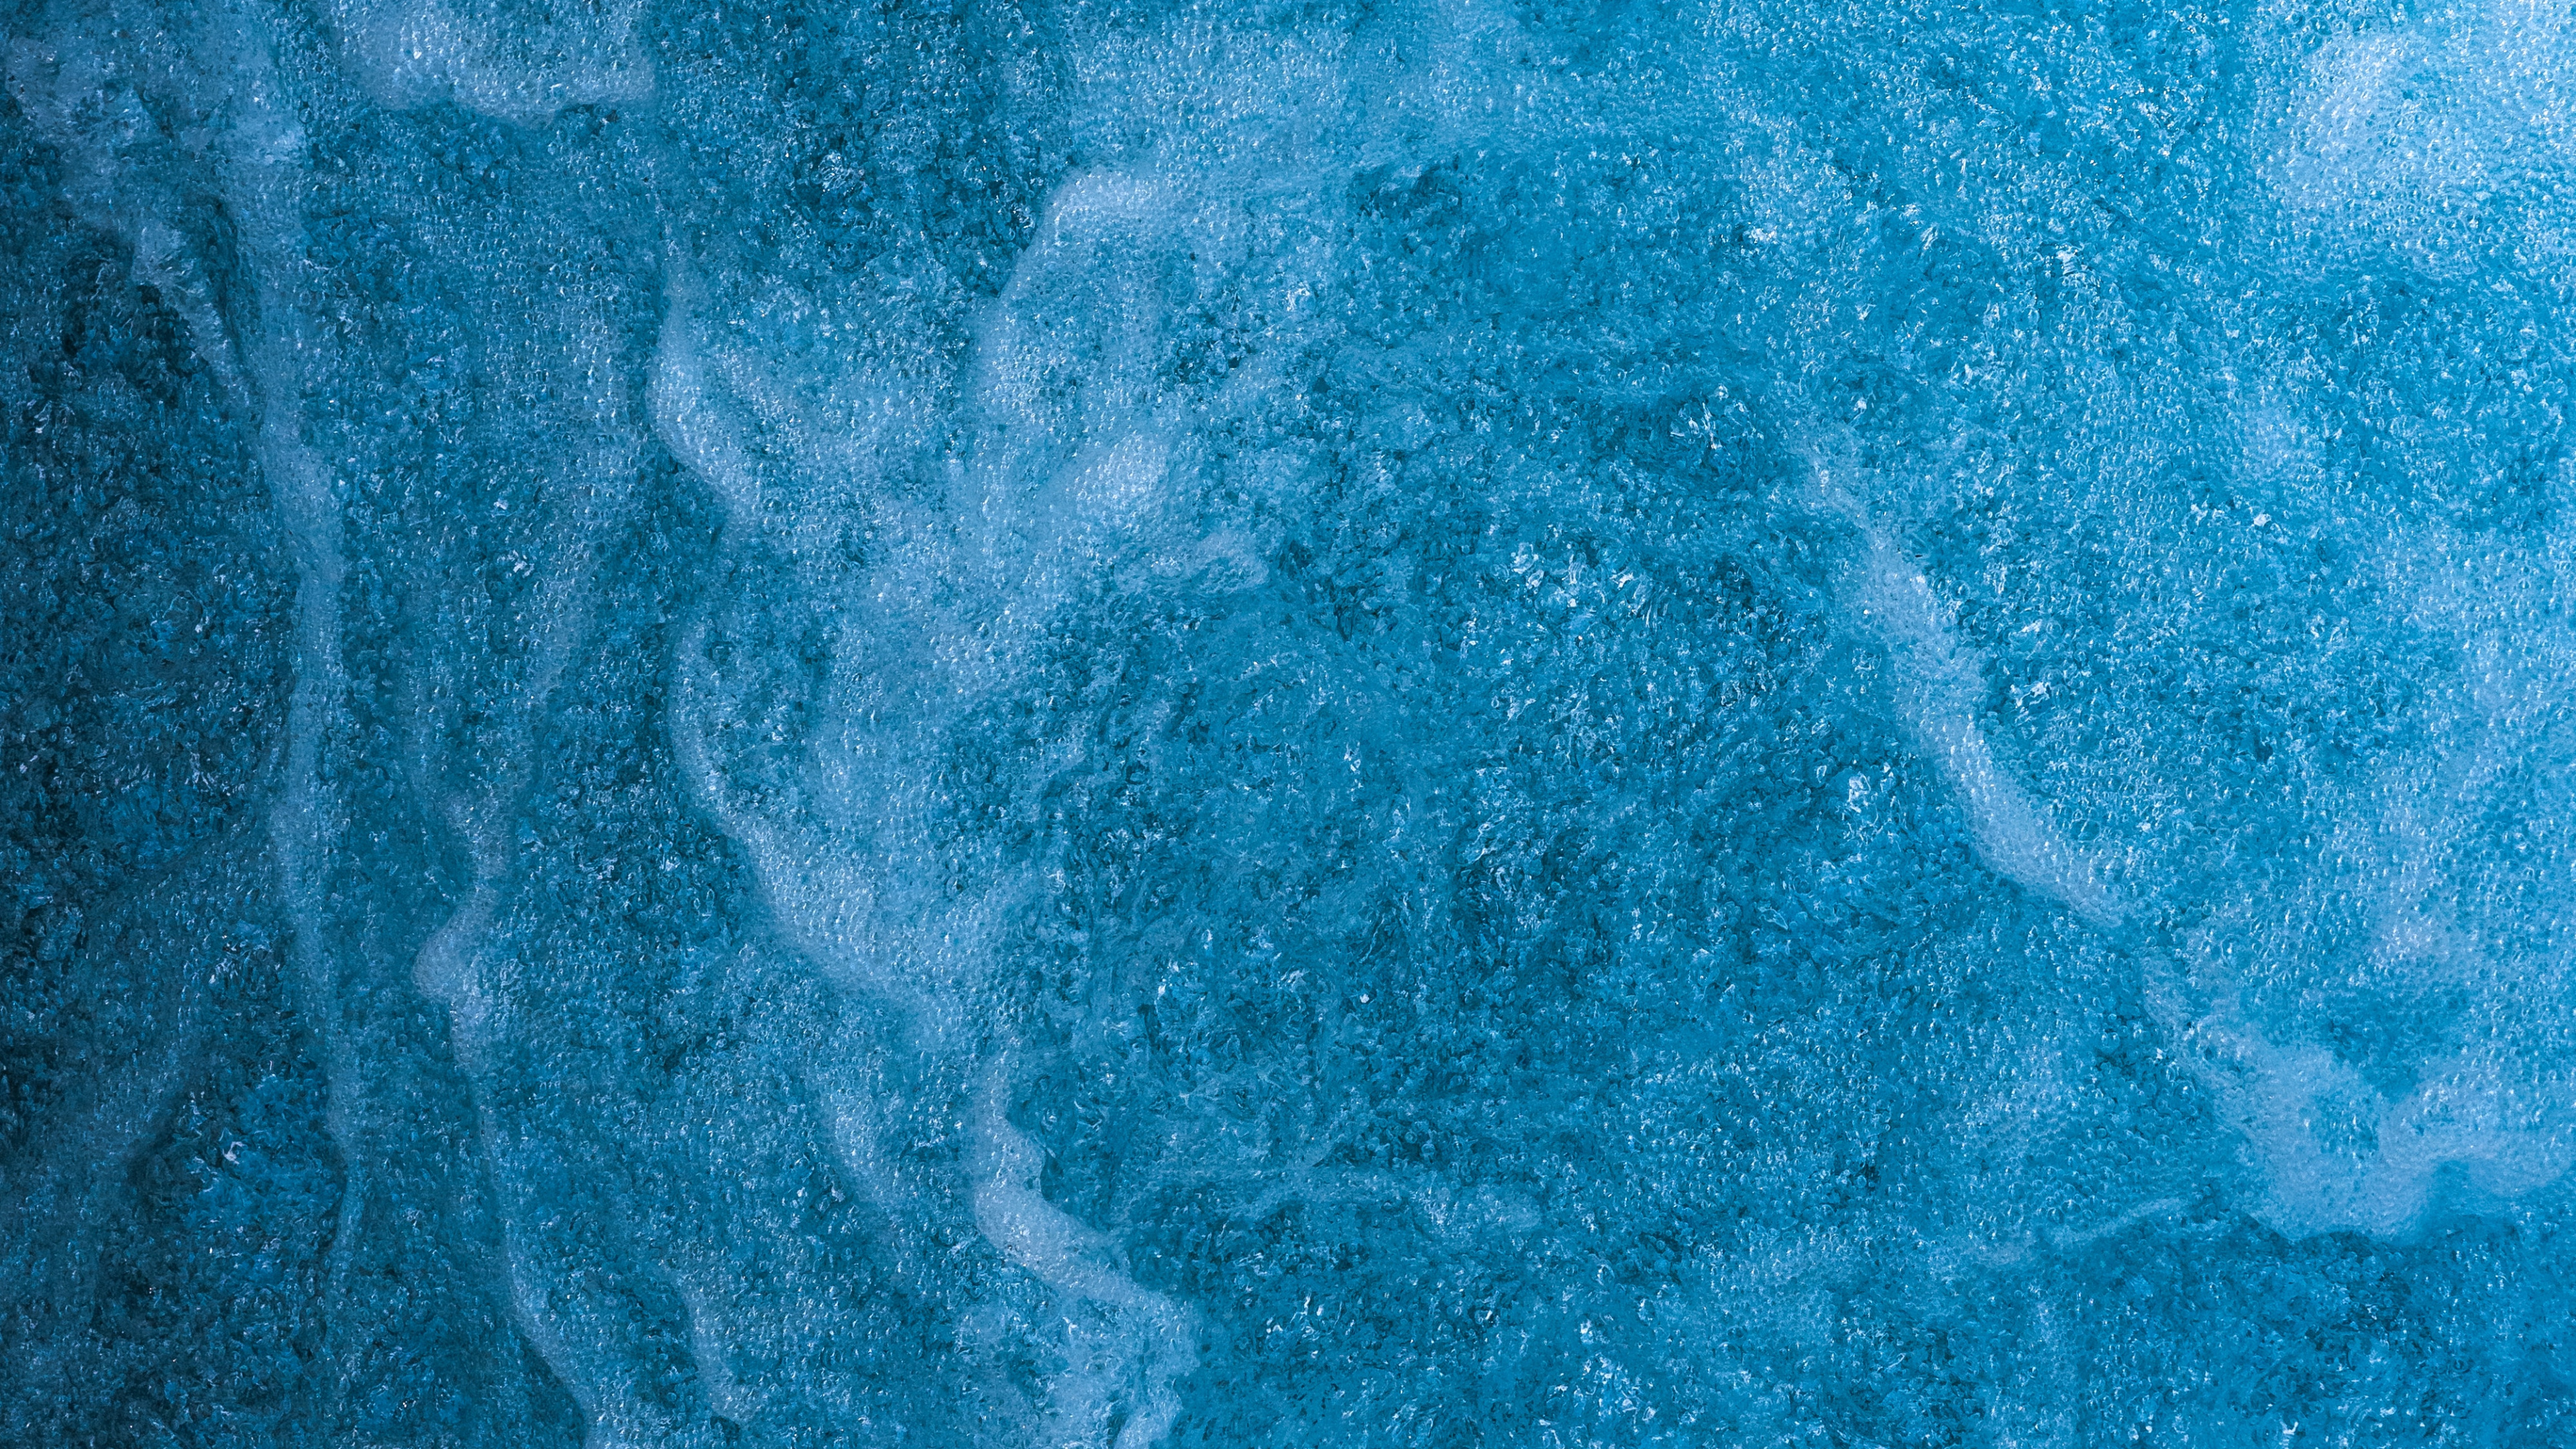 Texture, Water, Blue, Aqua, Turquoise. Wallpaper in 3840x2160 Resolution